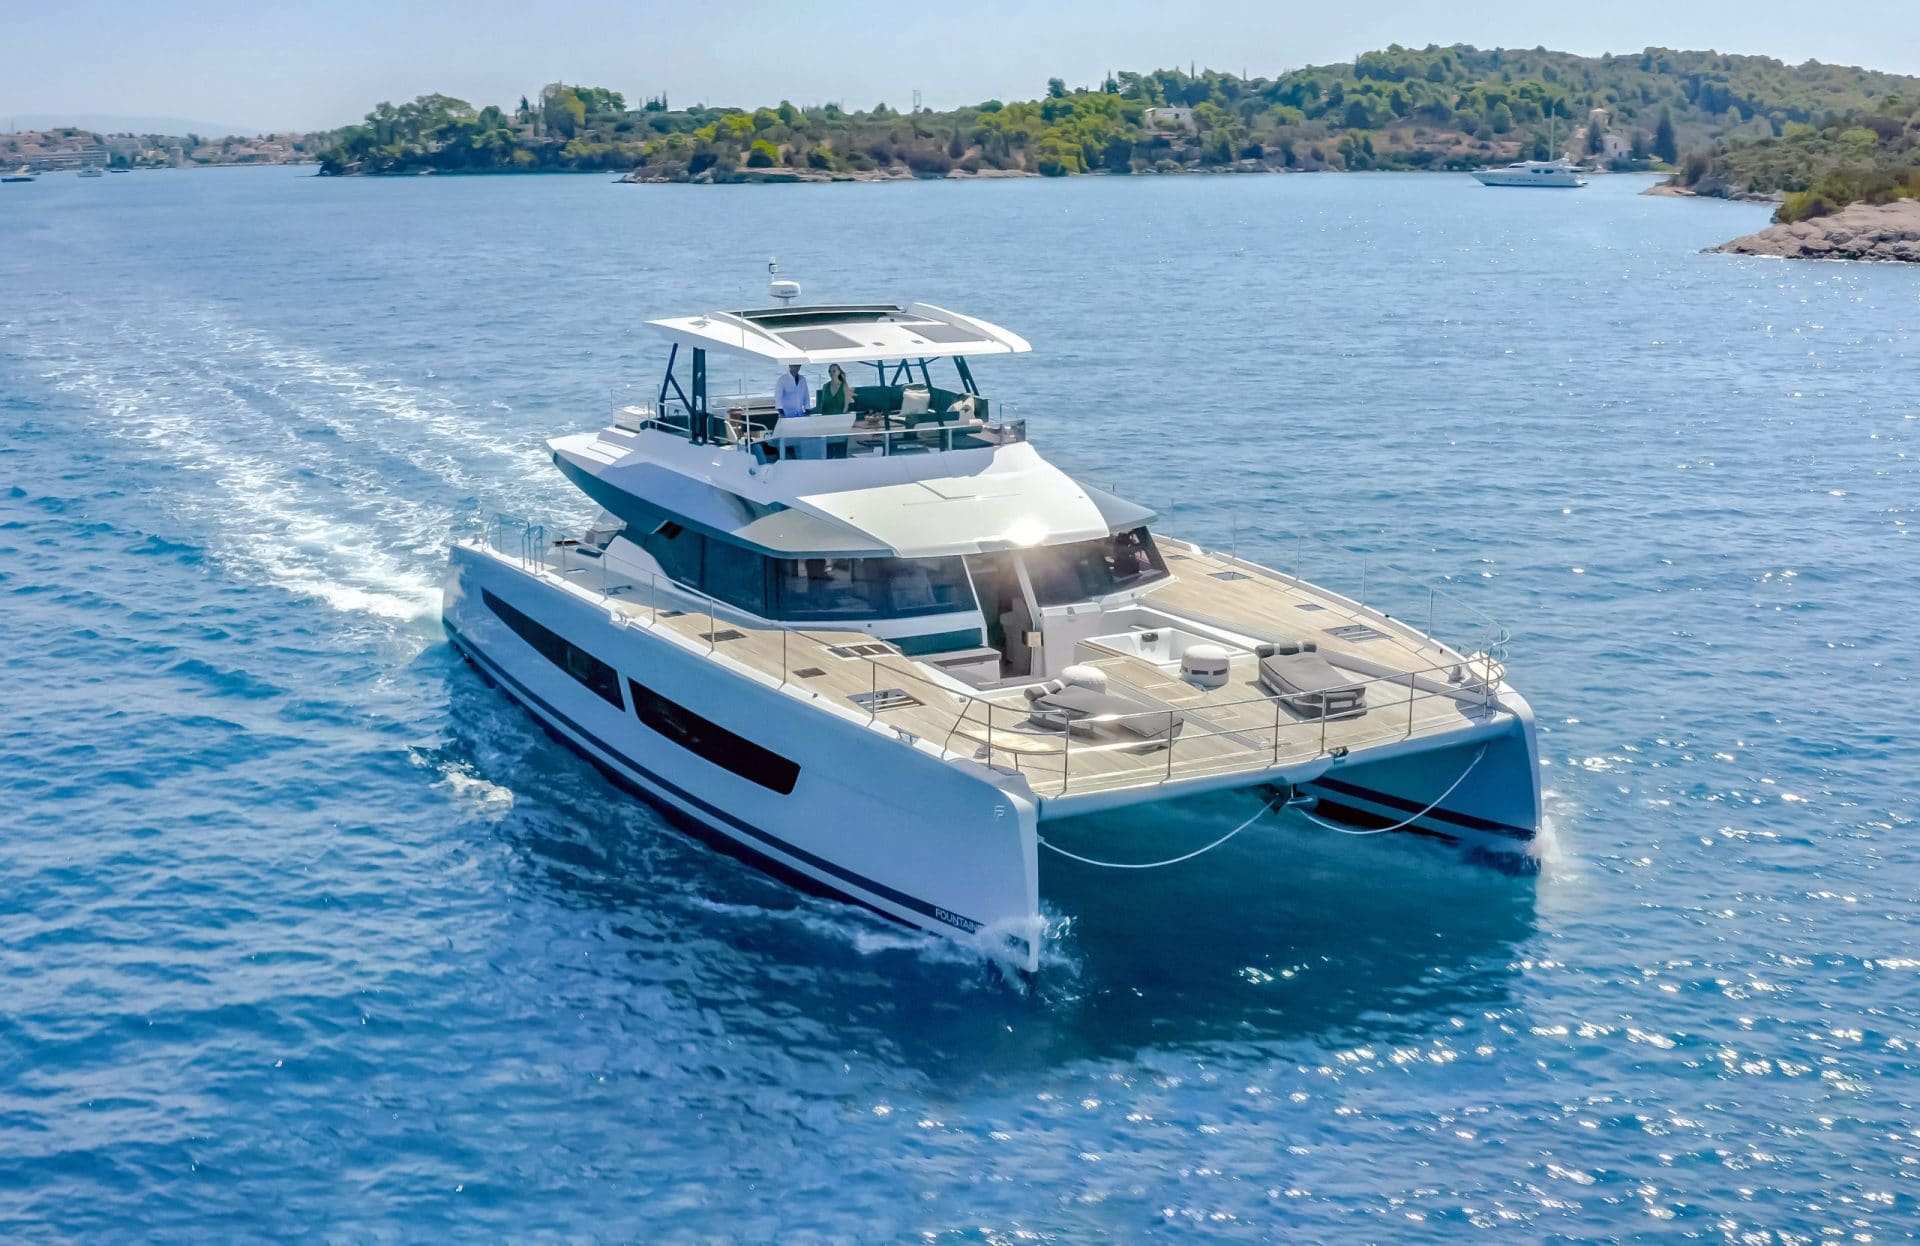 FOUNTAINE PAJOT POWER 67 RUNNING 03 Scaled